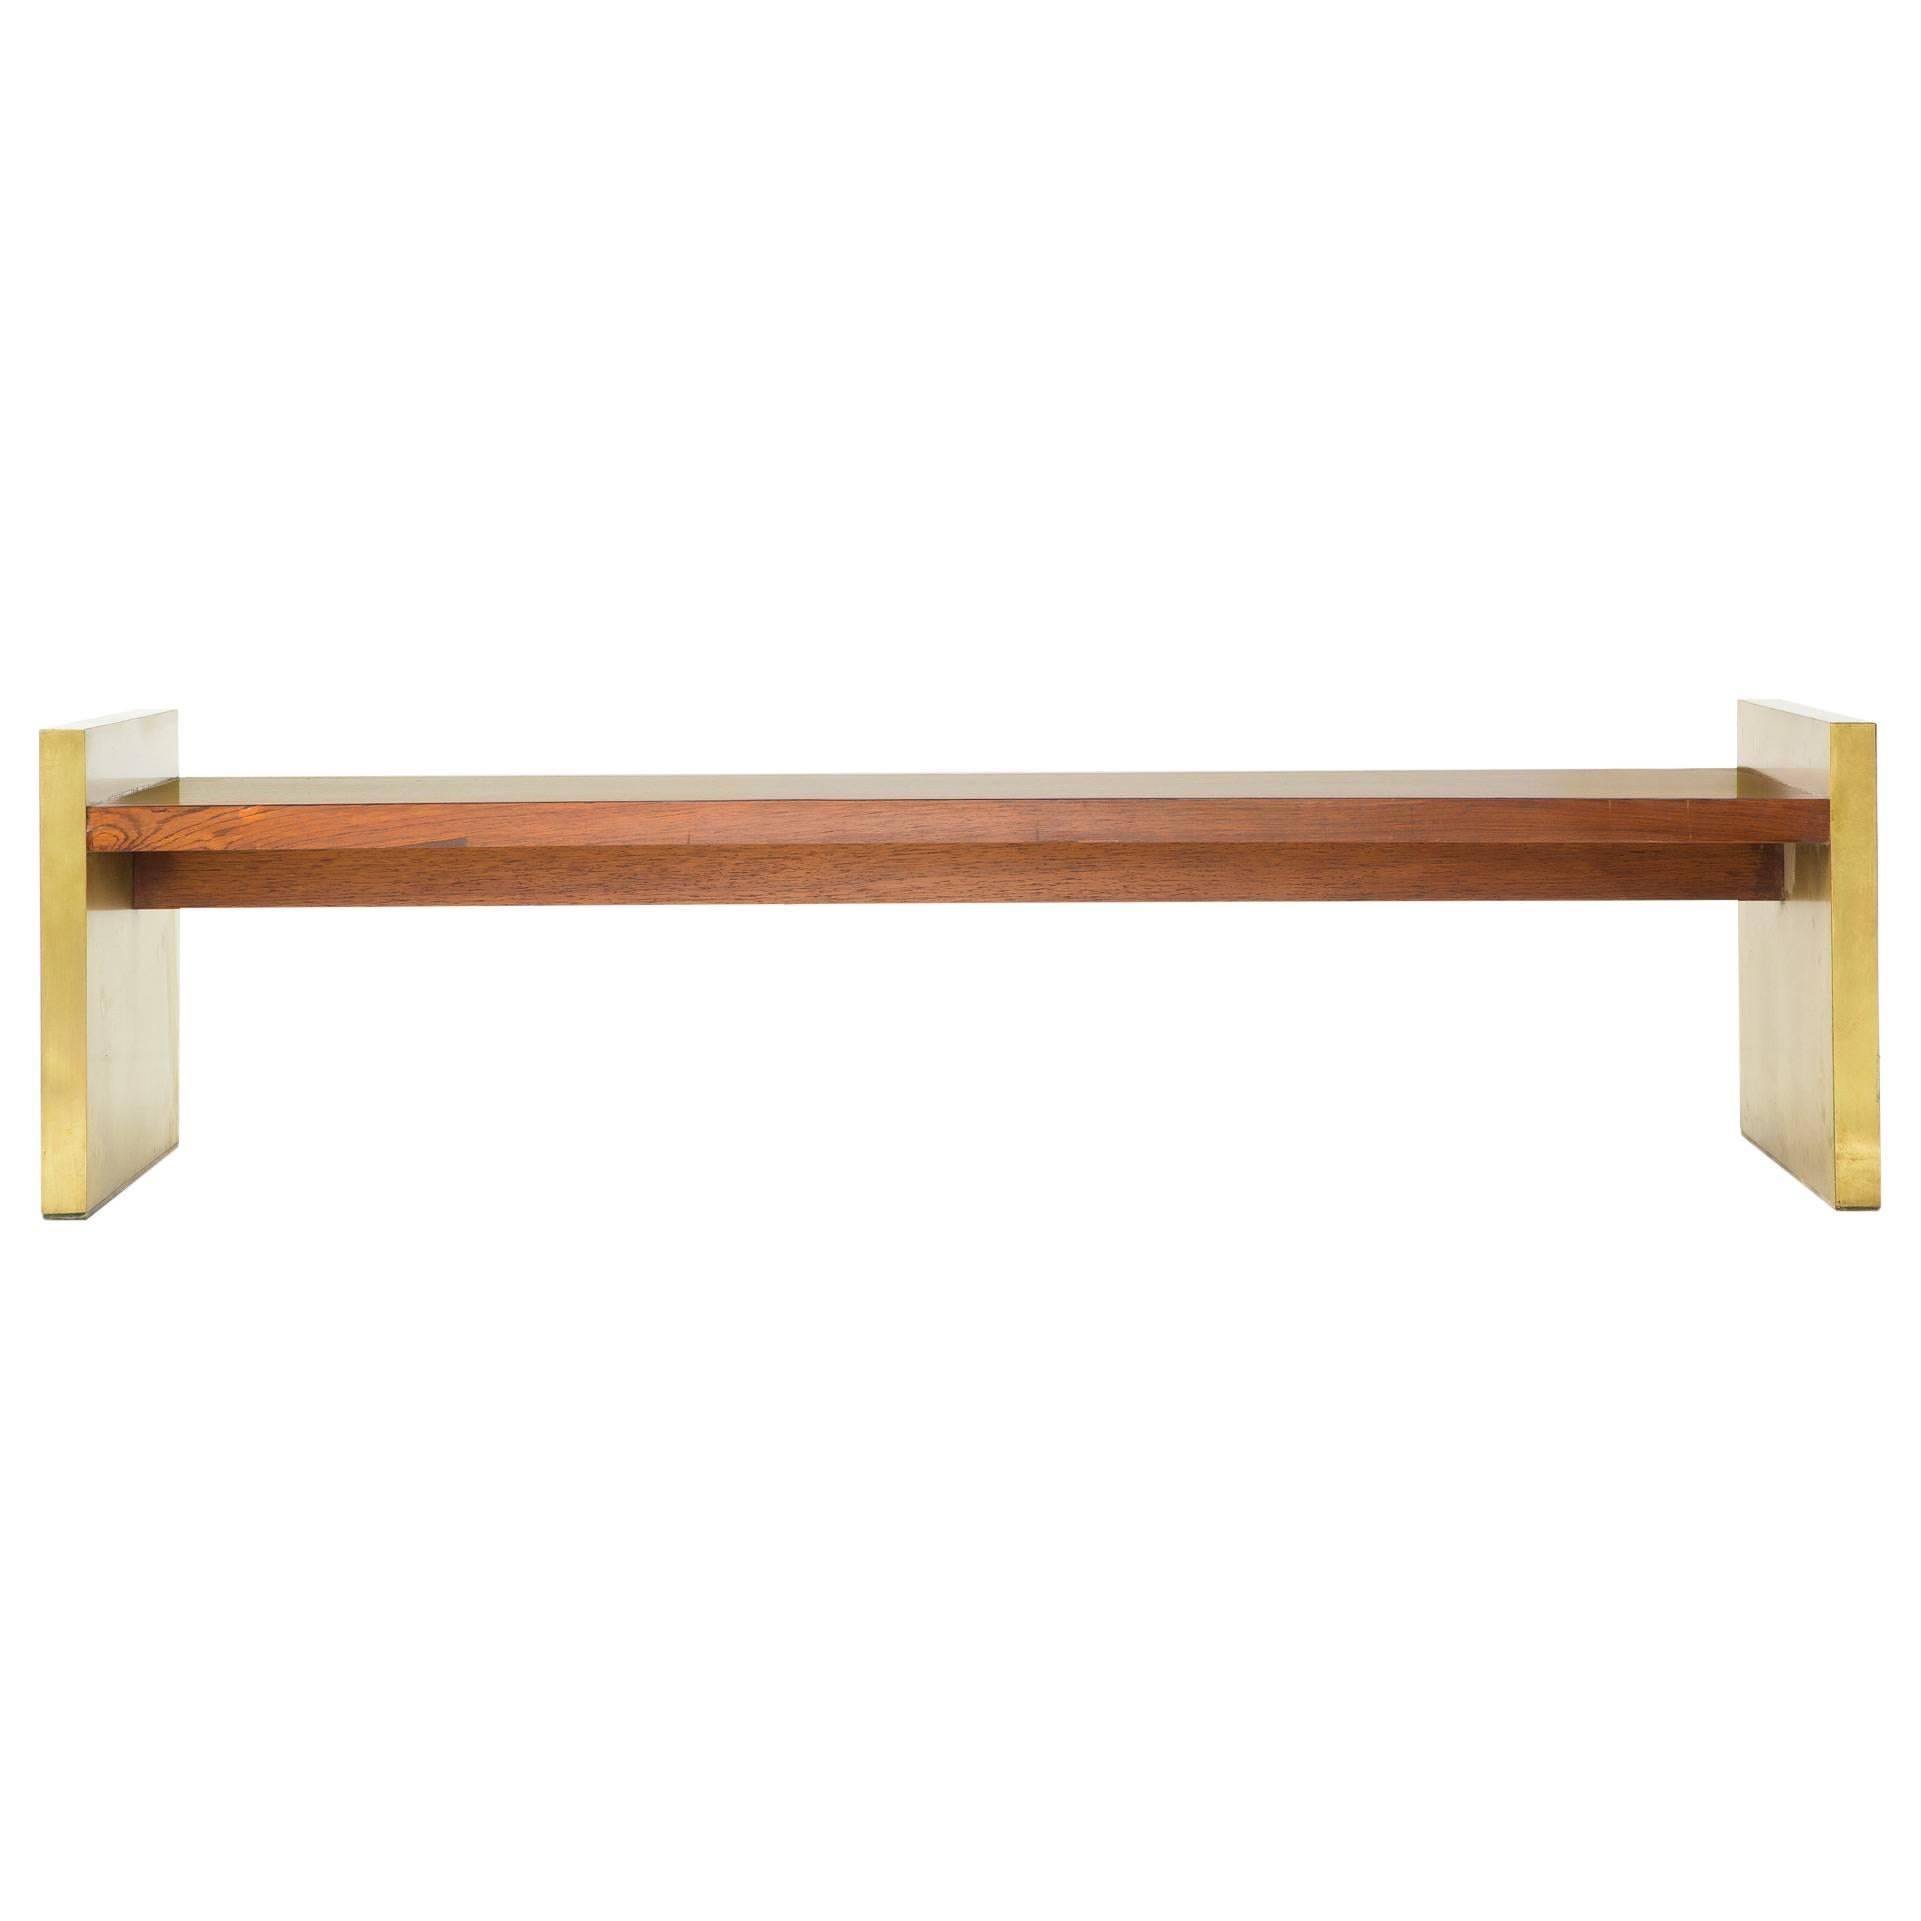 Art Deco Brass and Rosewood Window Bench by Roger Sprunger for Dunbar